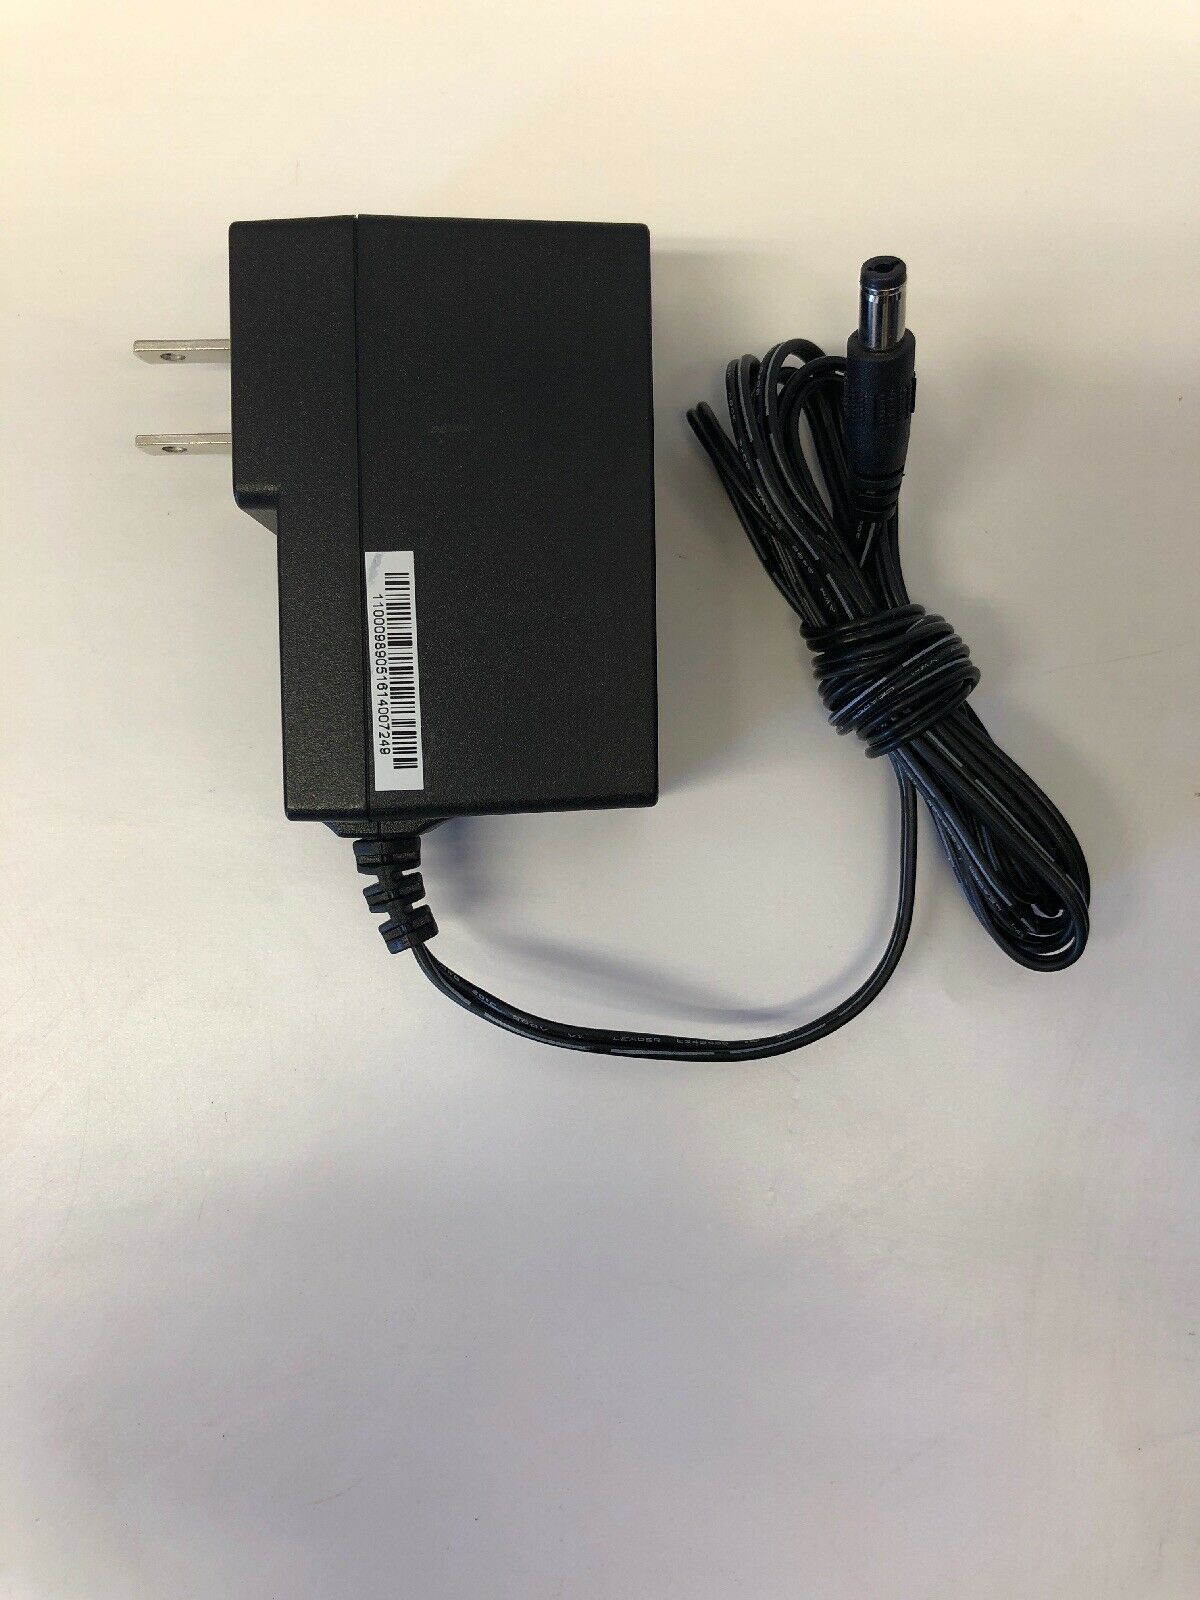 AC Adapter For Bissell 2054 2002 20028 2002Q Pet Stain Eraser Power Supply Mains Specifications: Type: AC to DC Standar